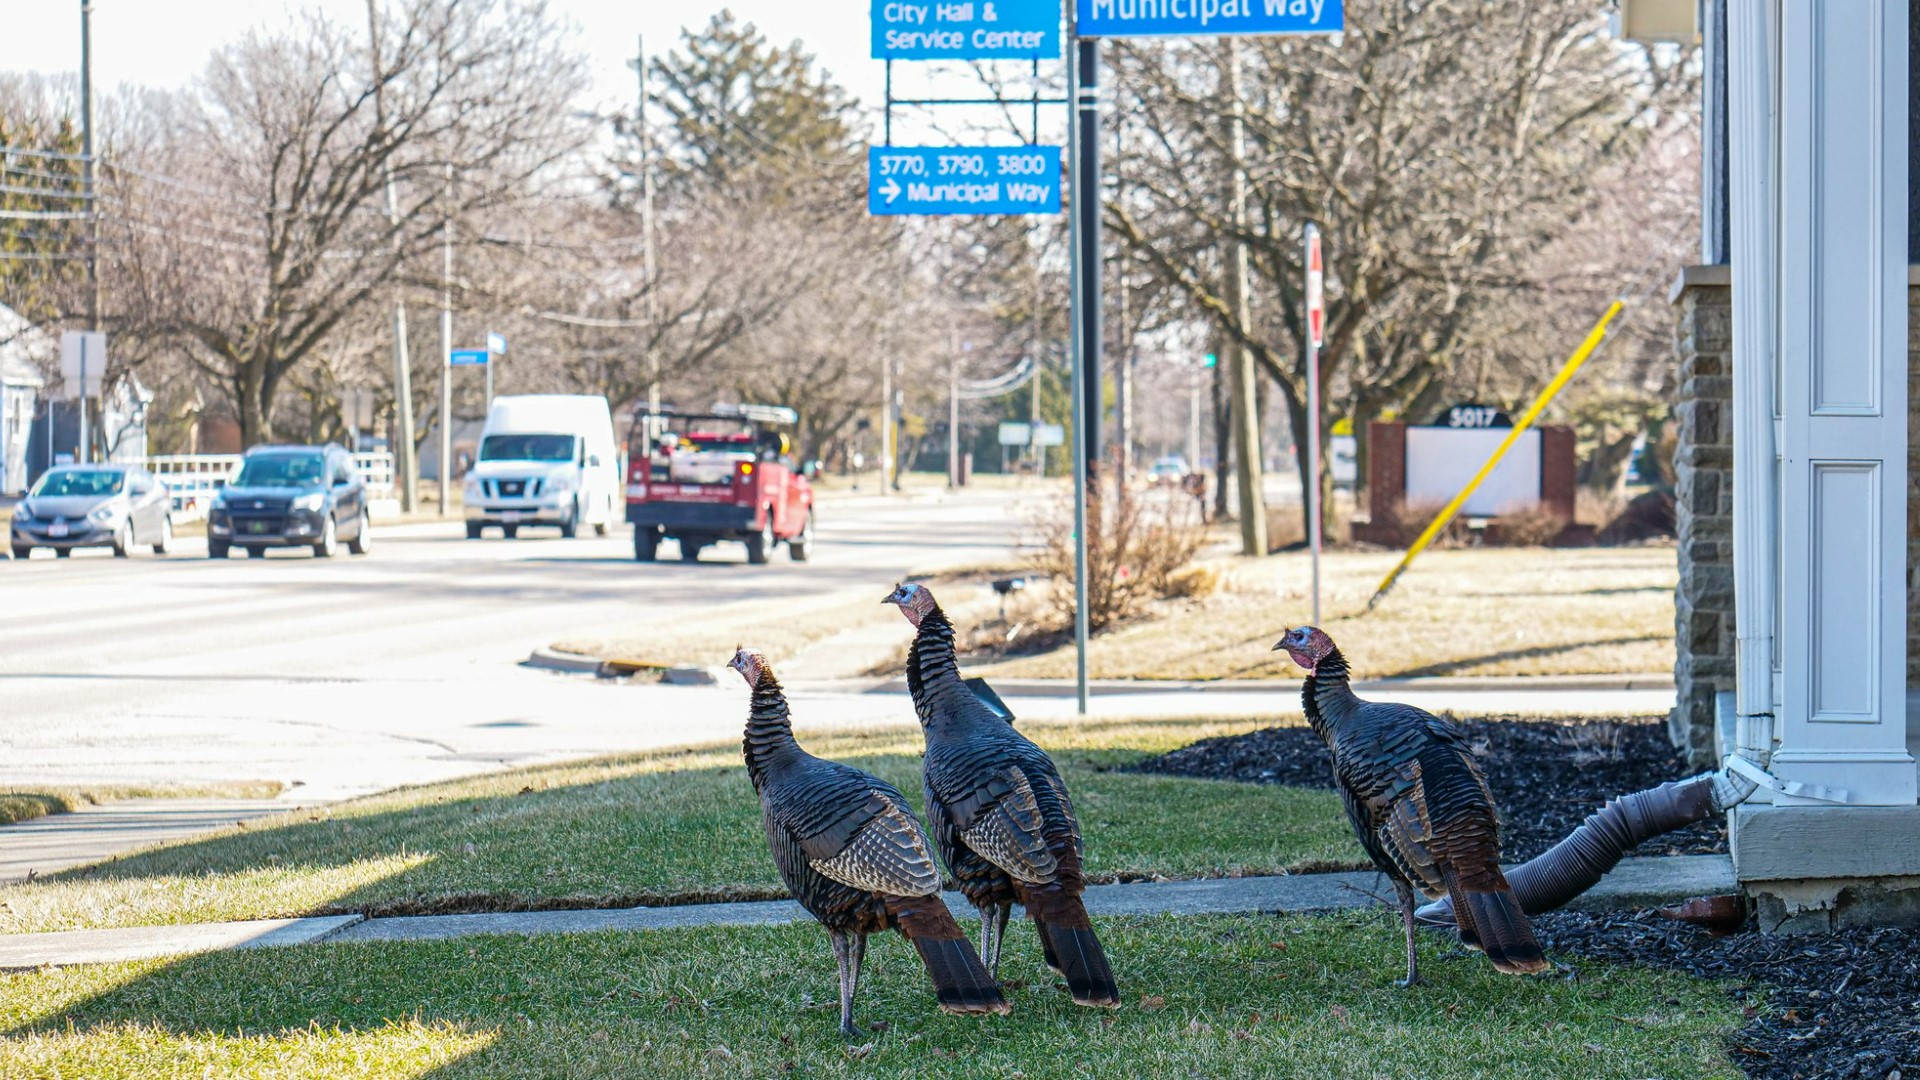 The male turkeys, dubbed the "Hilliard Turkey Gang," cannot be relocated due to ODNR regulations, according to a Facebook post made by the city.